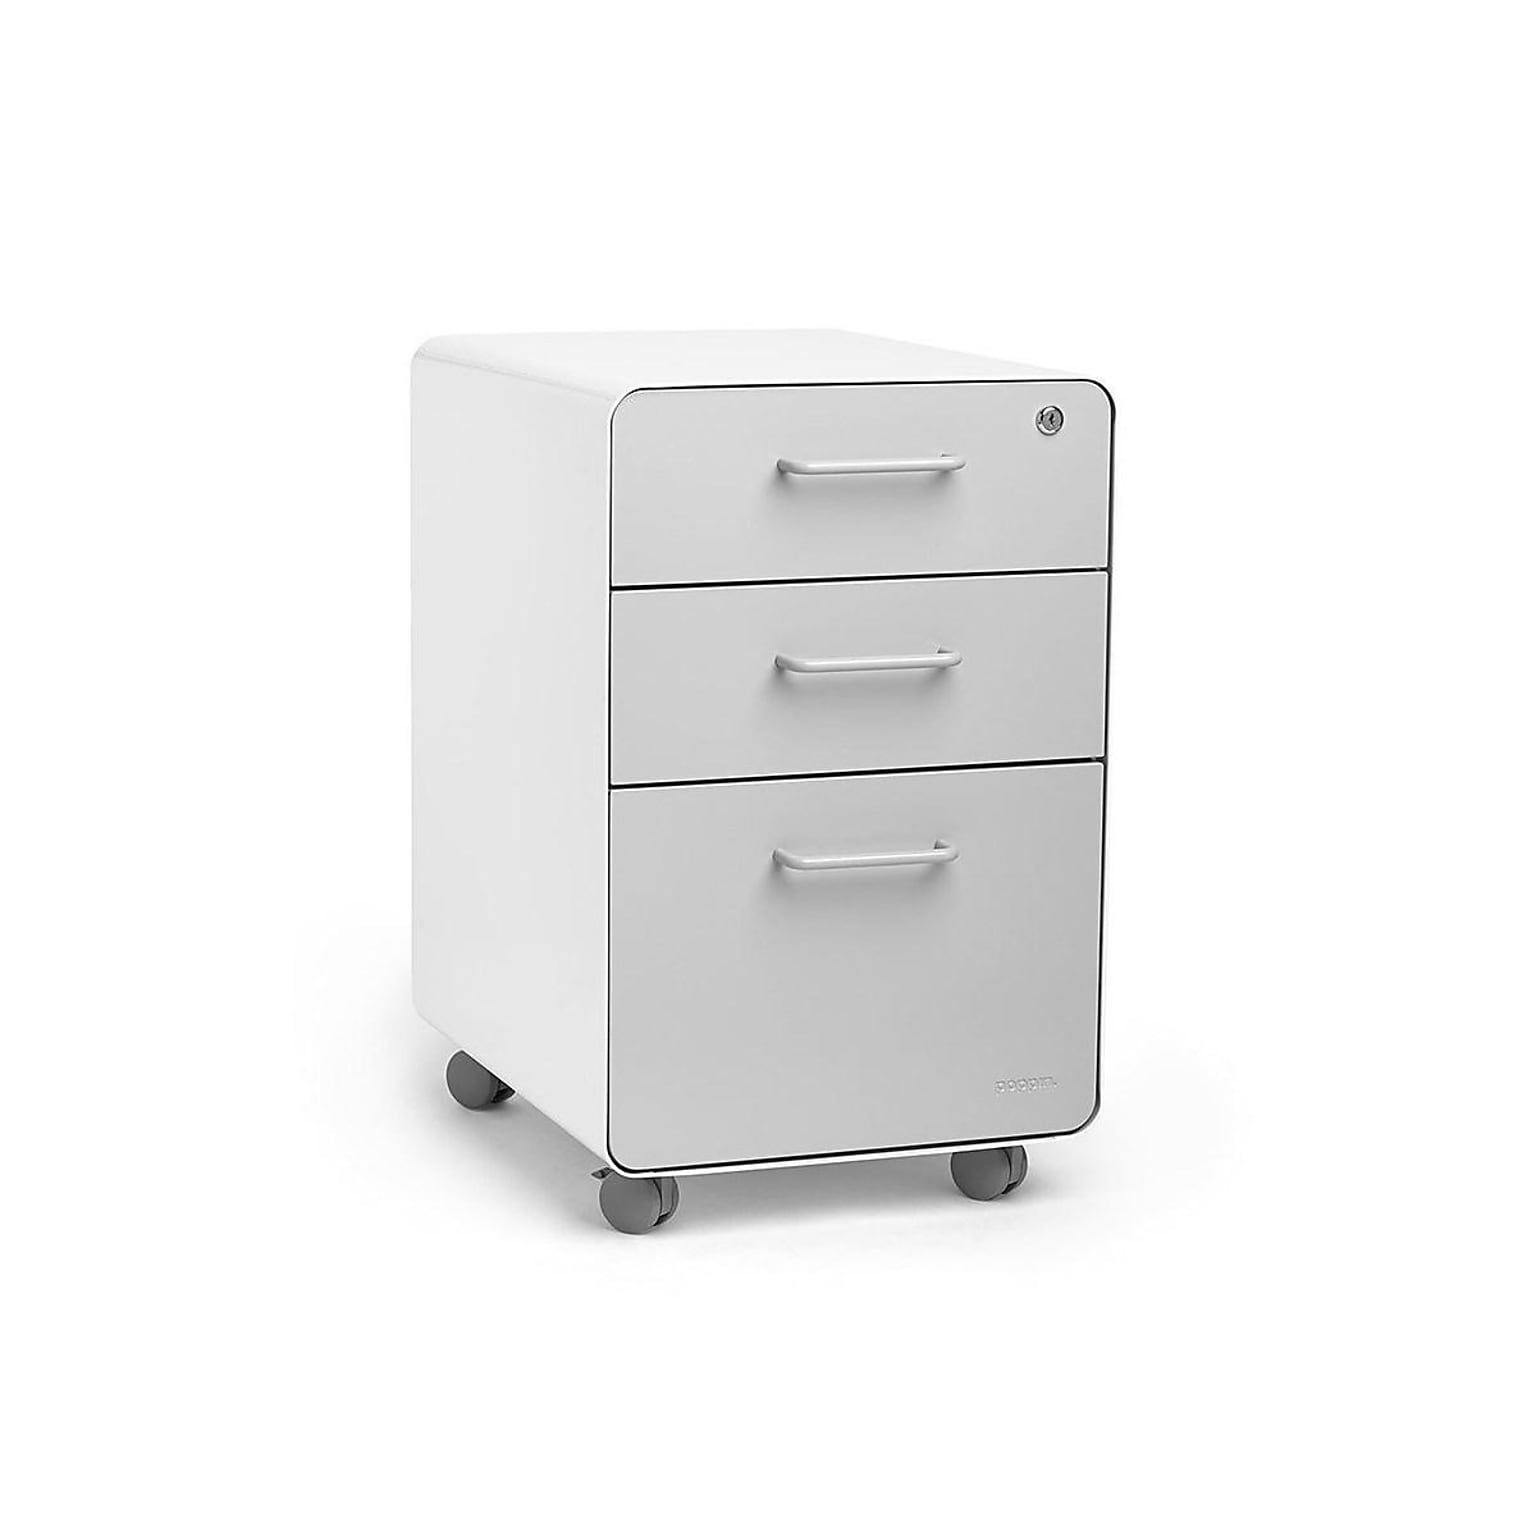 Poppin Stow 3-Drawer Mobile Vertical File Cabinet, Letter/Legal Size, Lockable, 24H x 15.75W x 20D, White/Light Gray (101251)